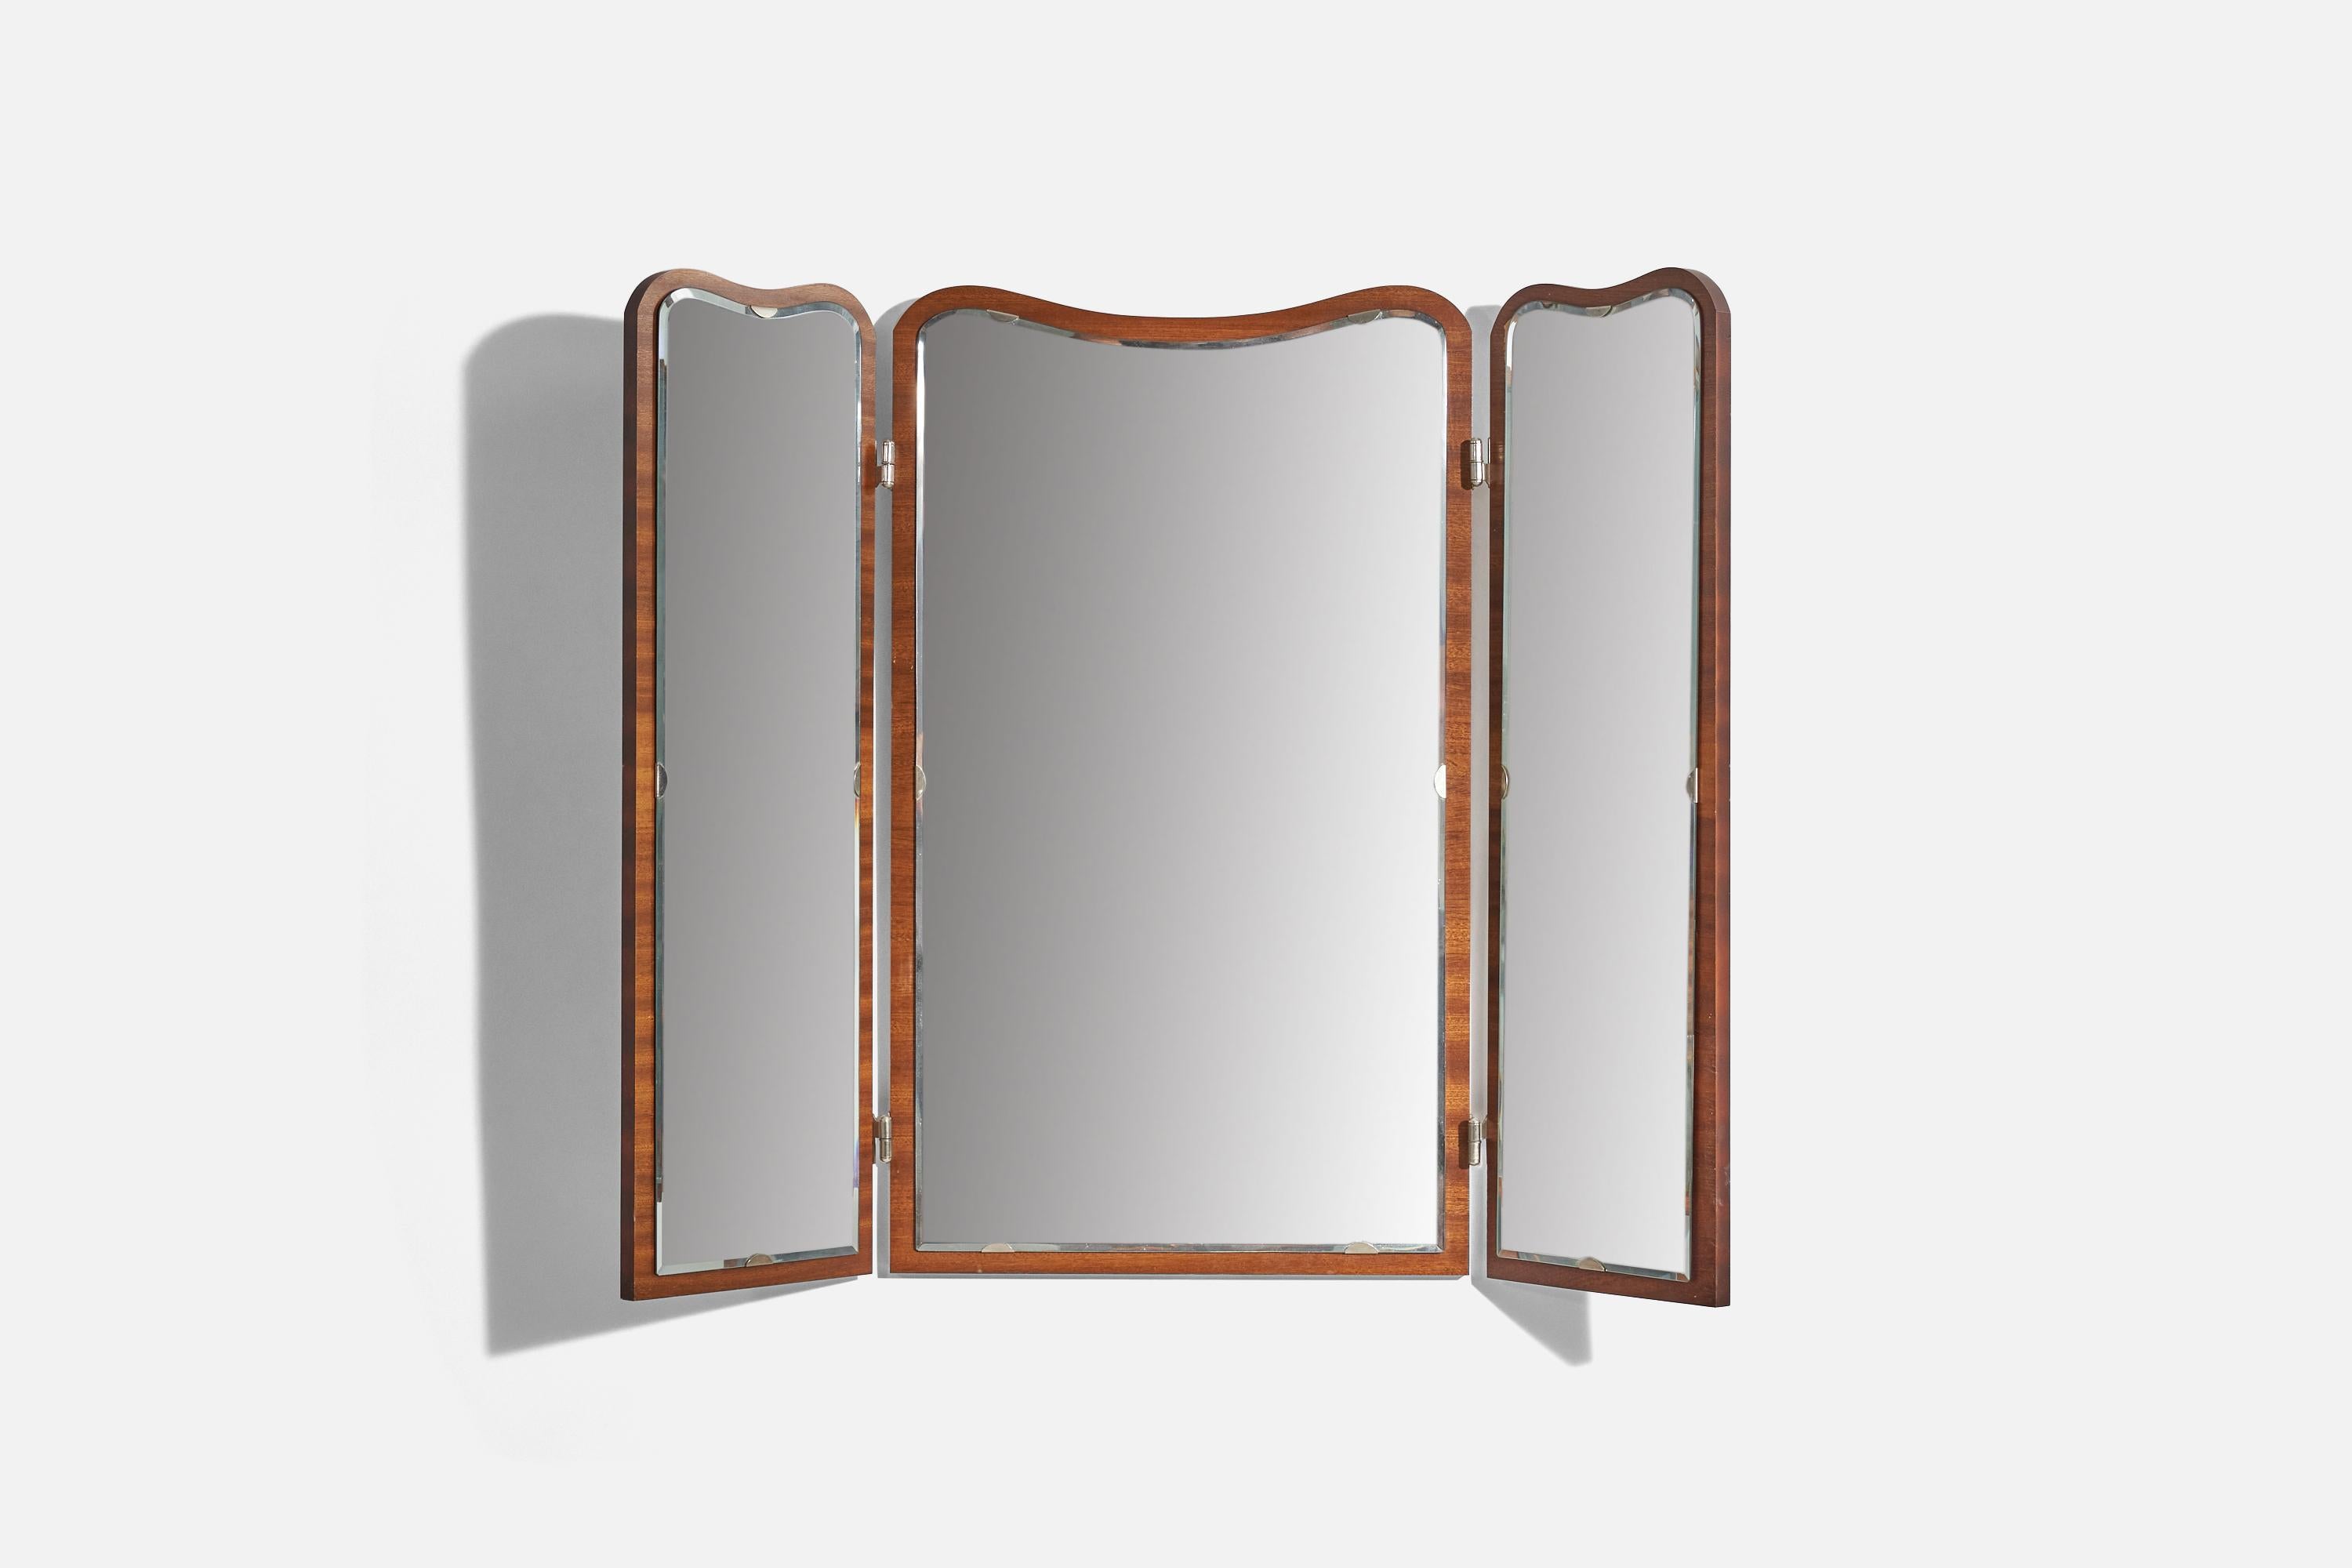 A lacquered burlwood wall mirror designed and produced in Sweden, 1930s. Features it's original mirror glass and a lacquered burlwood frame.